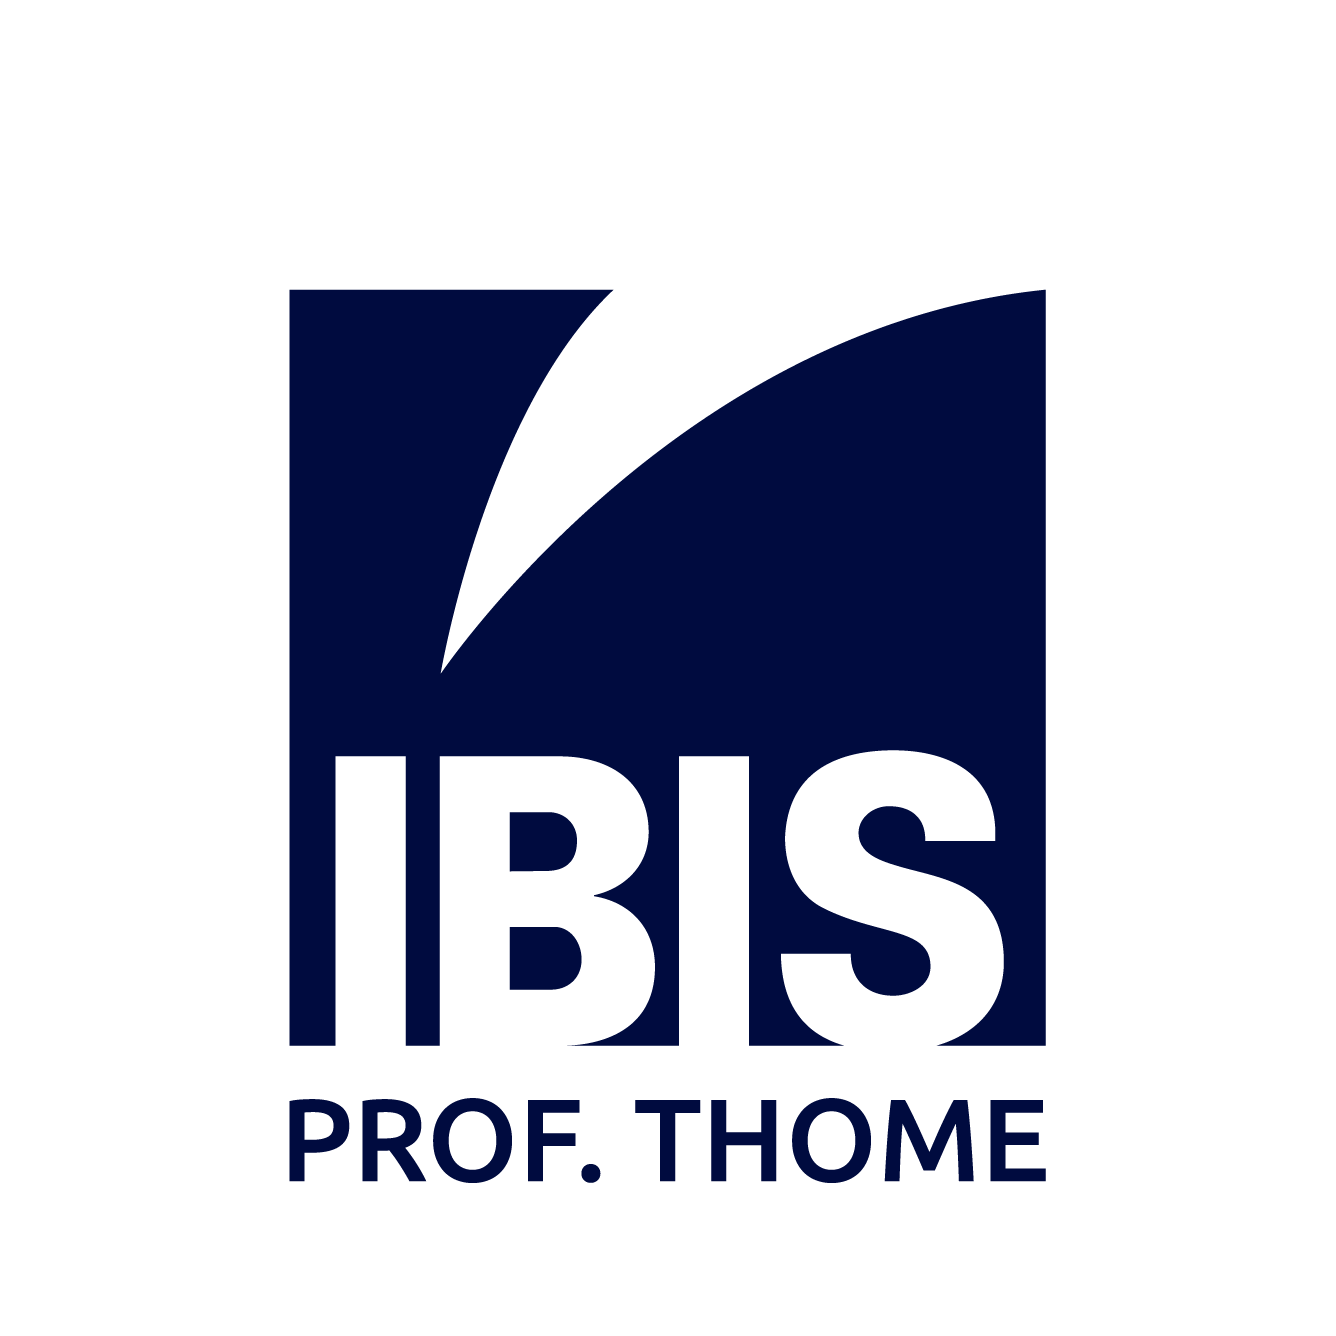 Ibis Logo - Welcome to our website of IBIS America Inc.